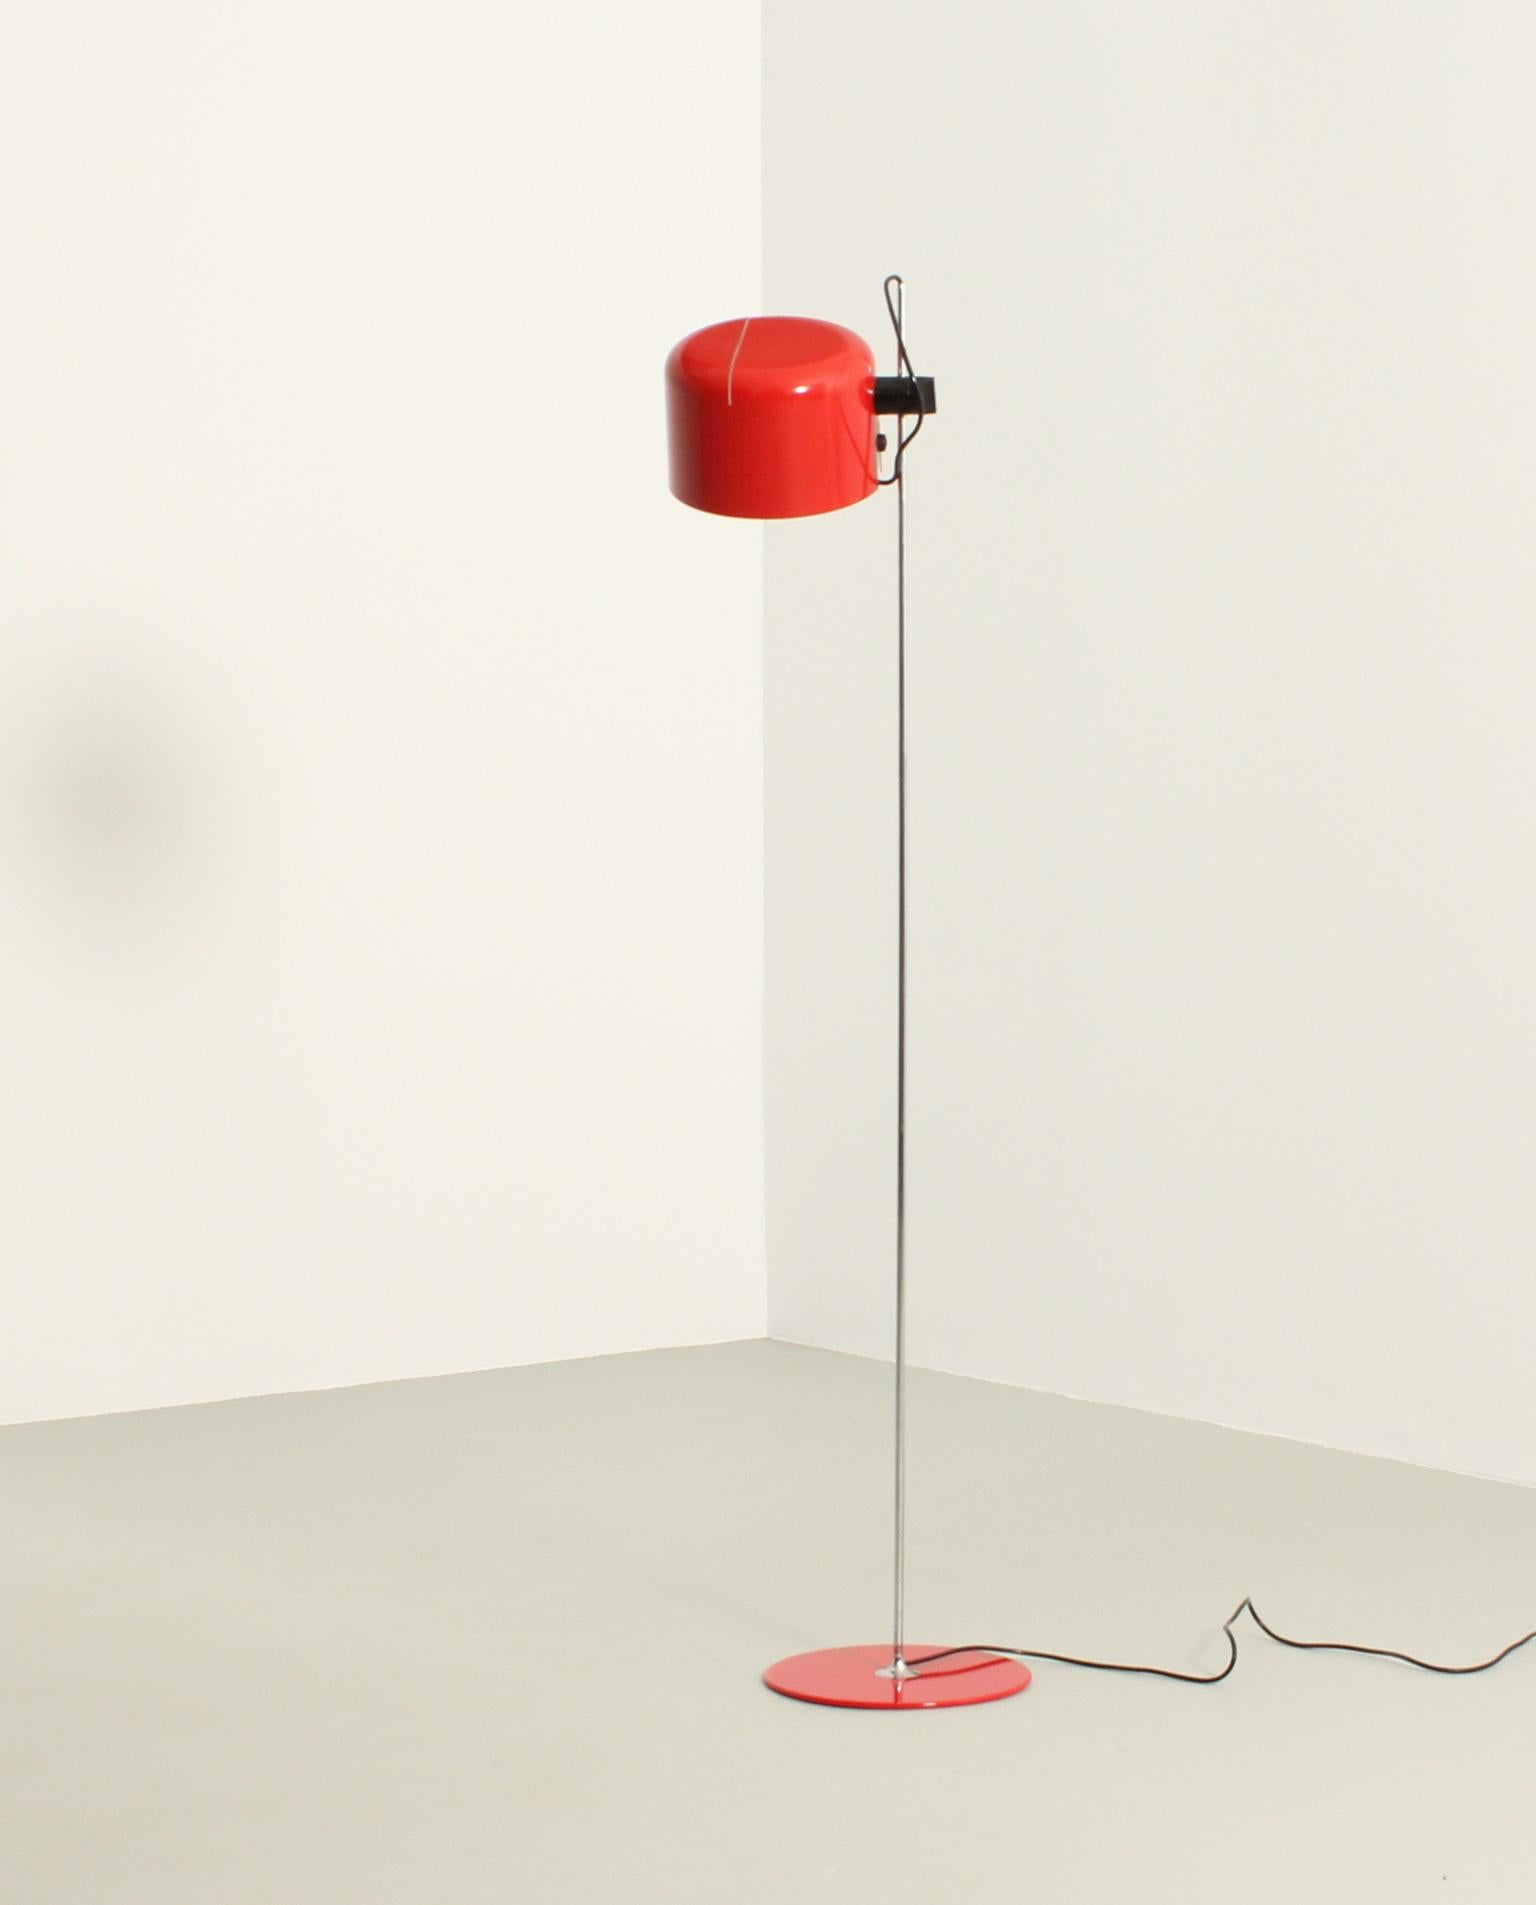 Coupé floor lamp designed by Joe Colombo in 1967 for Oluce, Italy. Early edition in red lacquered metal and chrome. Adjustable in height with rotary shade.